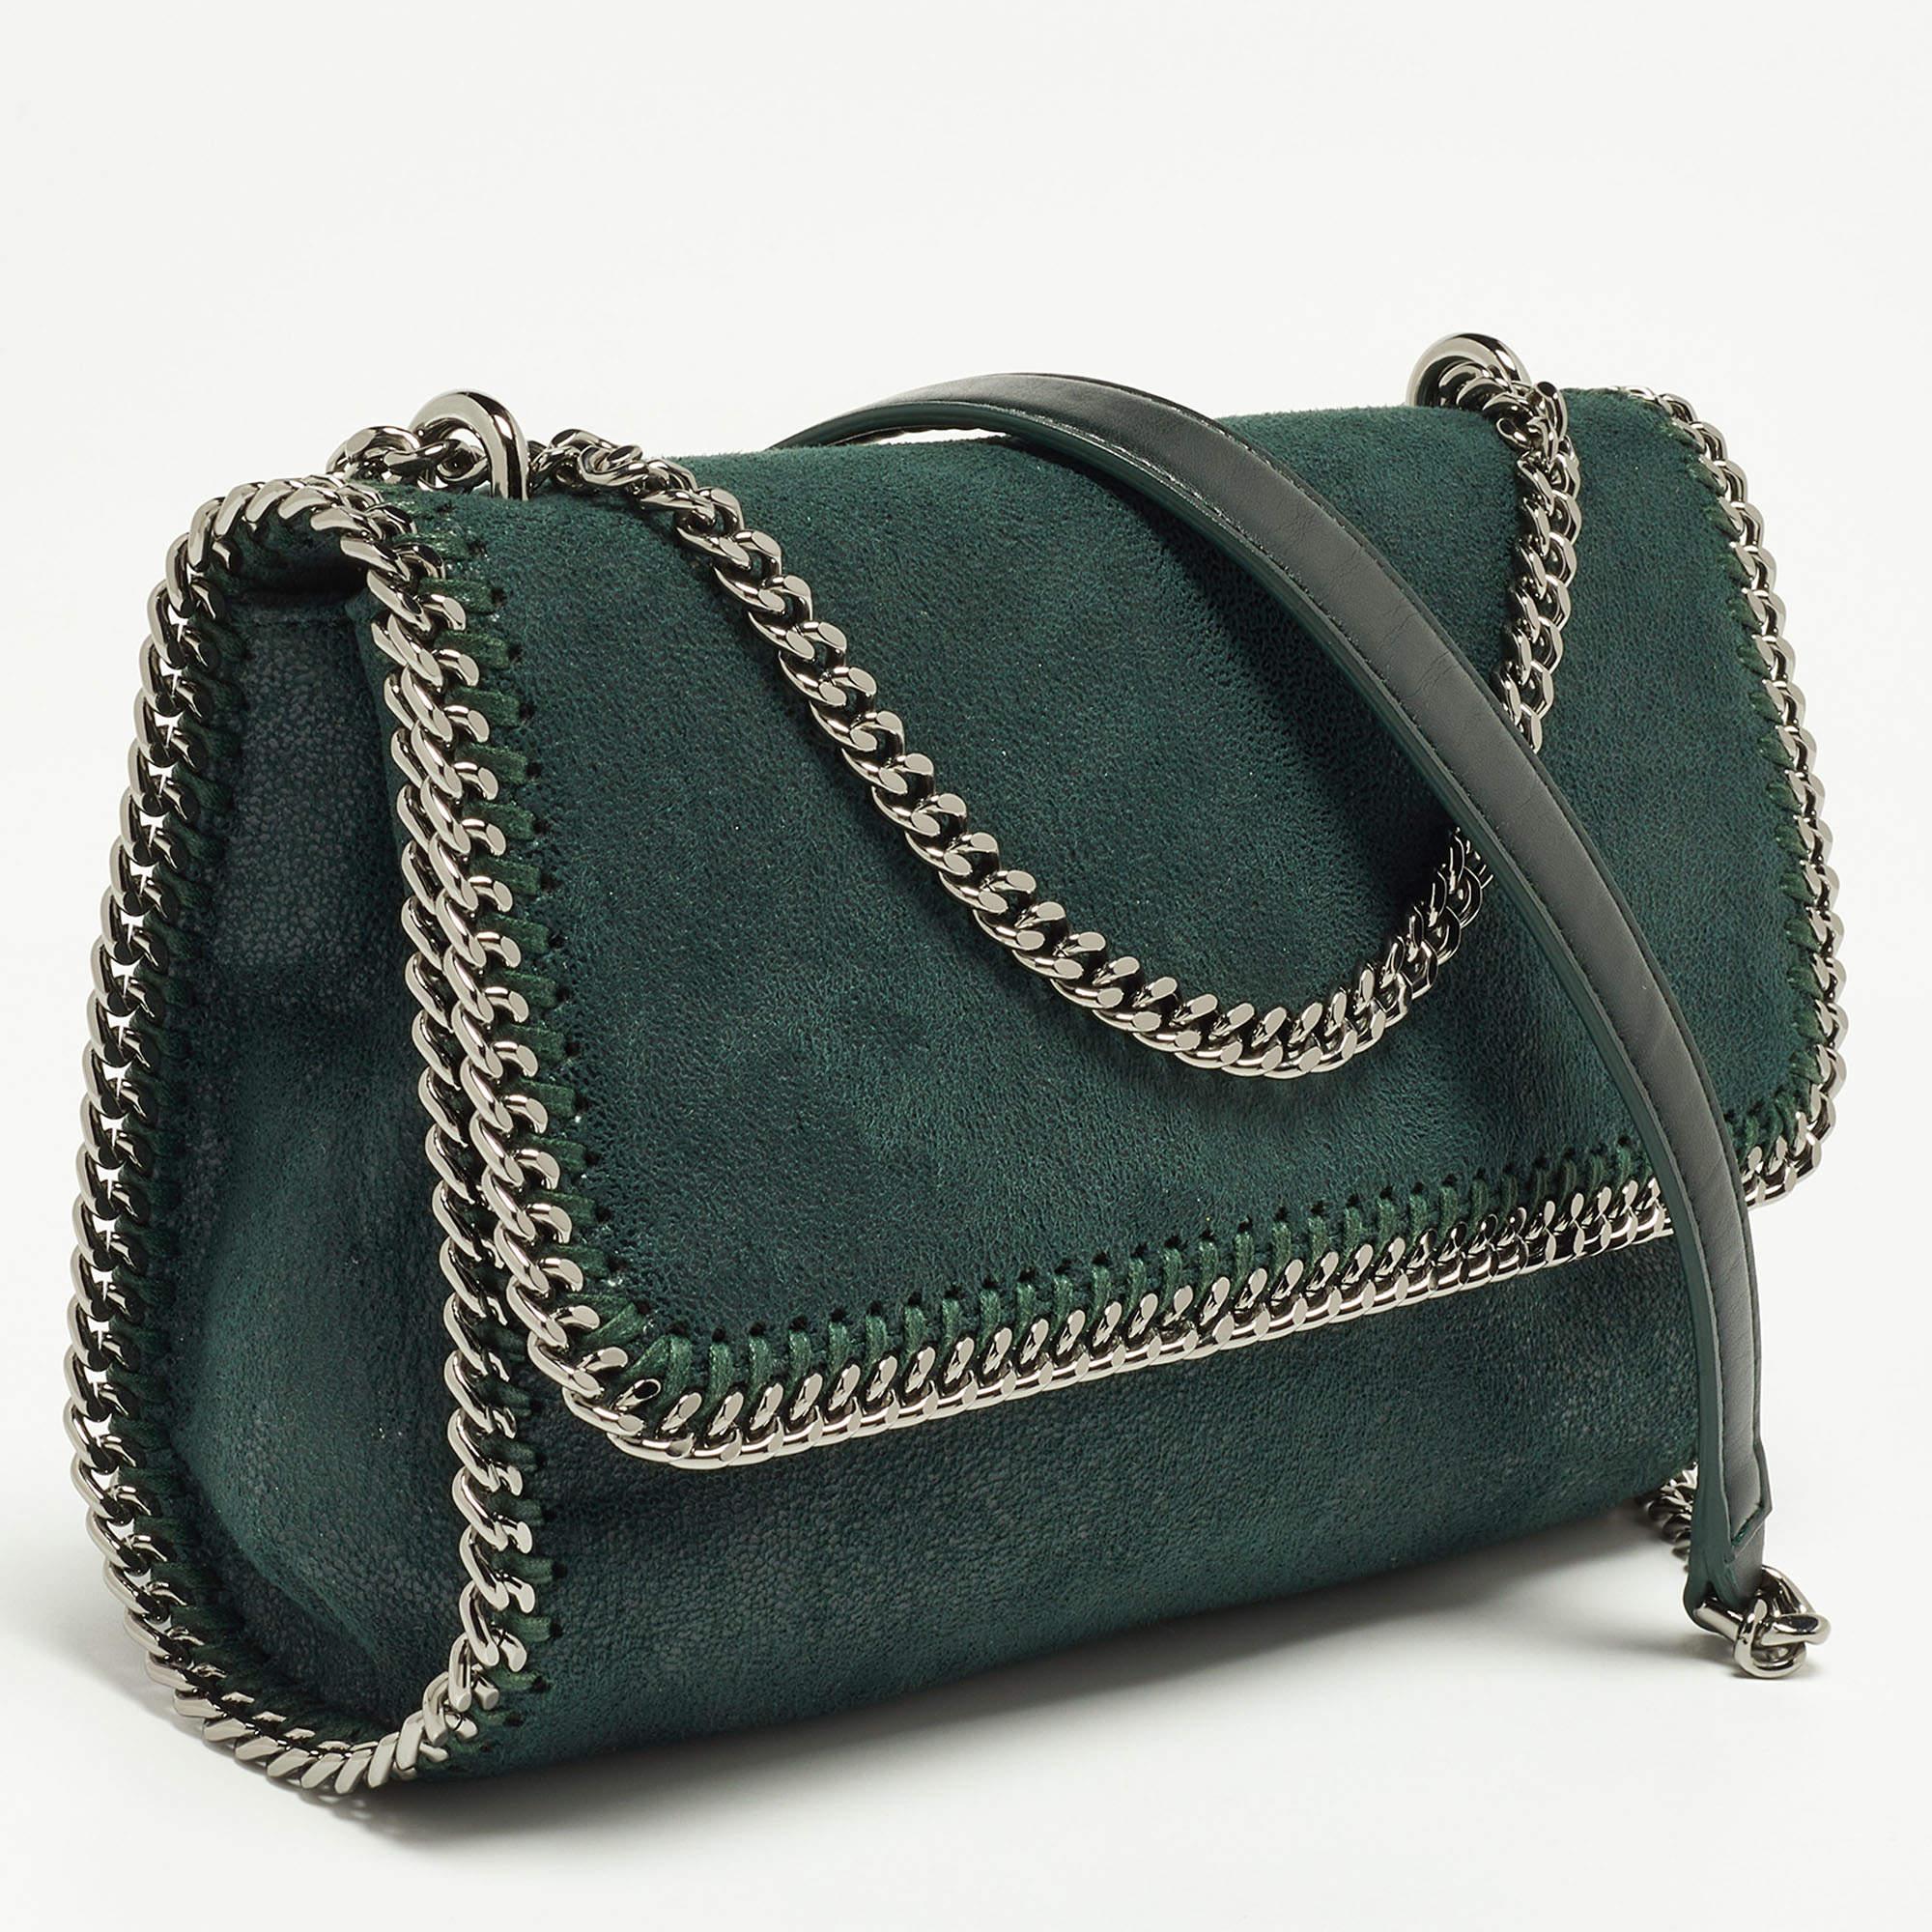 Trust this Stella McCartney Falabella shoulder bag to be light, durable, and comfortable to carry. It is crafted beautifully using the best materials to be a durable style ally.

